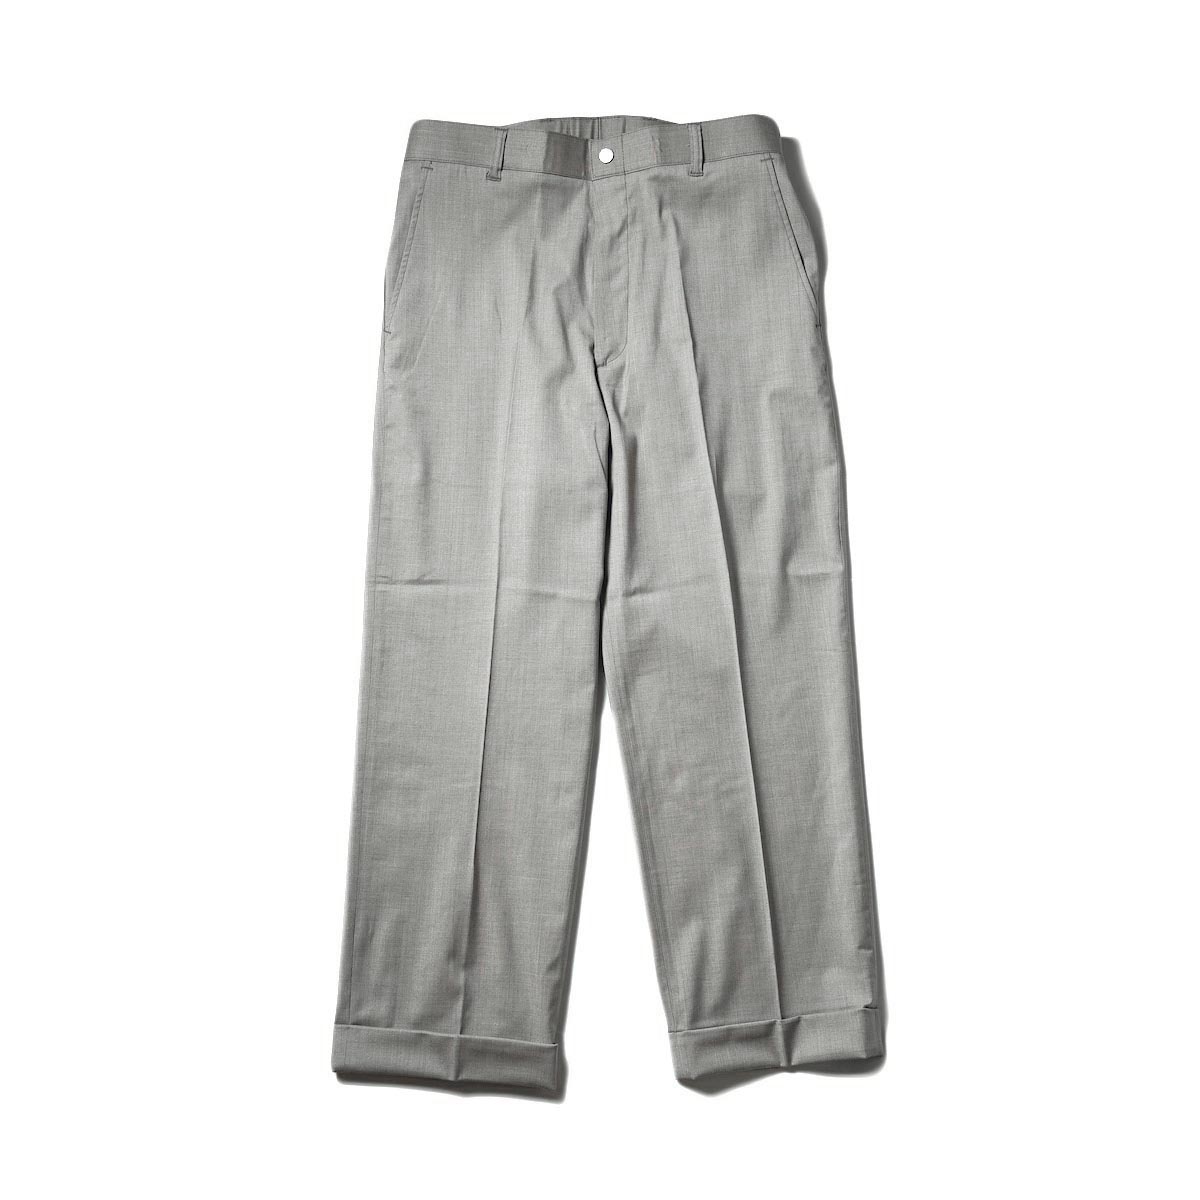 Willow Pants / P-009 - 80s Made In ITARY Dead Stock LIGHT GREY PANTS